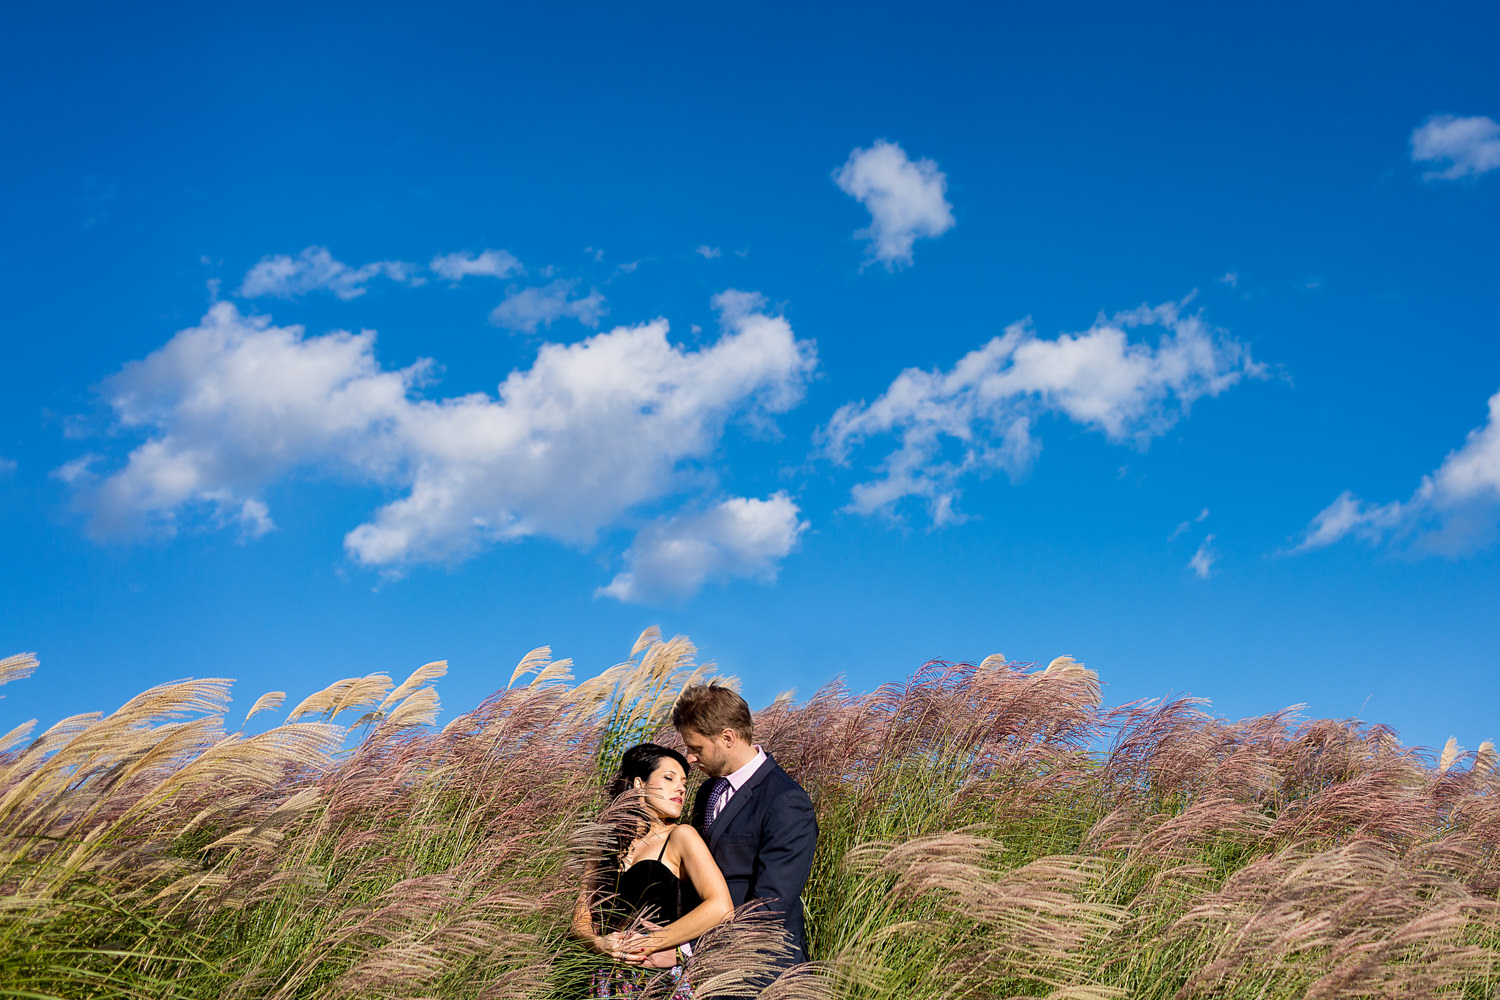 This engagement session was done at a boat dock in Maryland, the couple is standing in tall grass that is blowing to the right and the bride's head is turned to the right mimicking the movement of the grass, Procopio Photography, best top Washington DC photographer, best top Maryland photographer, best top Virginia photographer, best top DMV photographer, best top wedding photographer, best top commercial photographer, best top portrait photographer, best top boudoir photographer, modern fine art portraits, dramatic, unique, different, bold, editorial, photojournalism, award winning photographer, published photographer, memorable images, be different, stand out, engagement photography